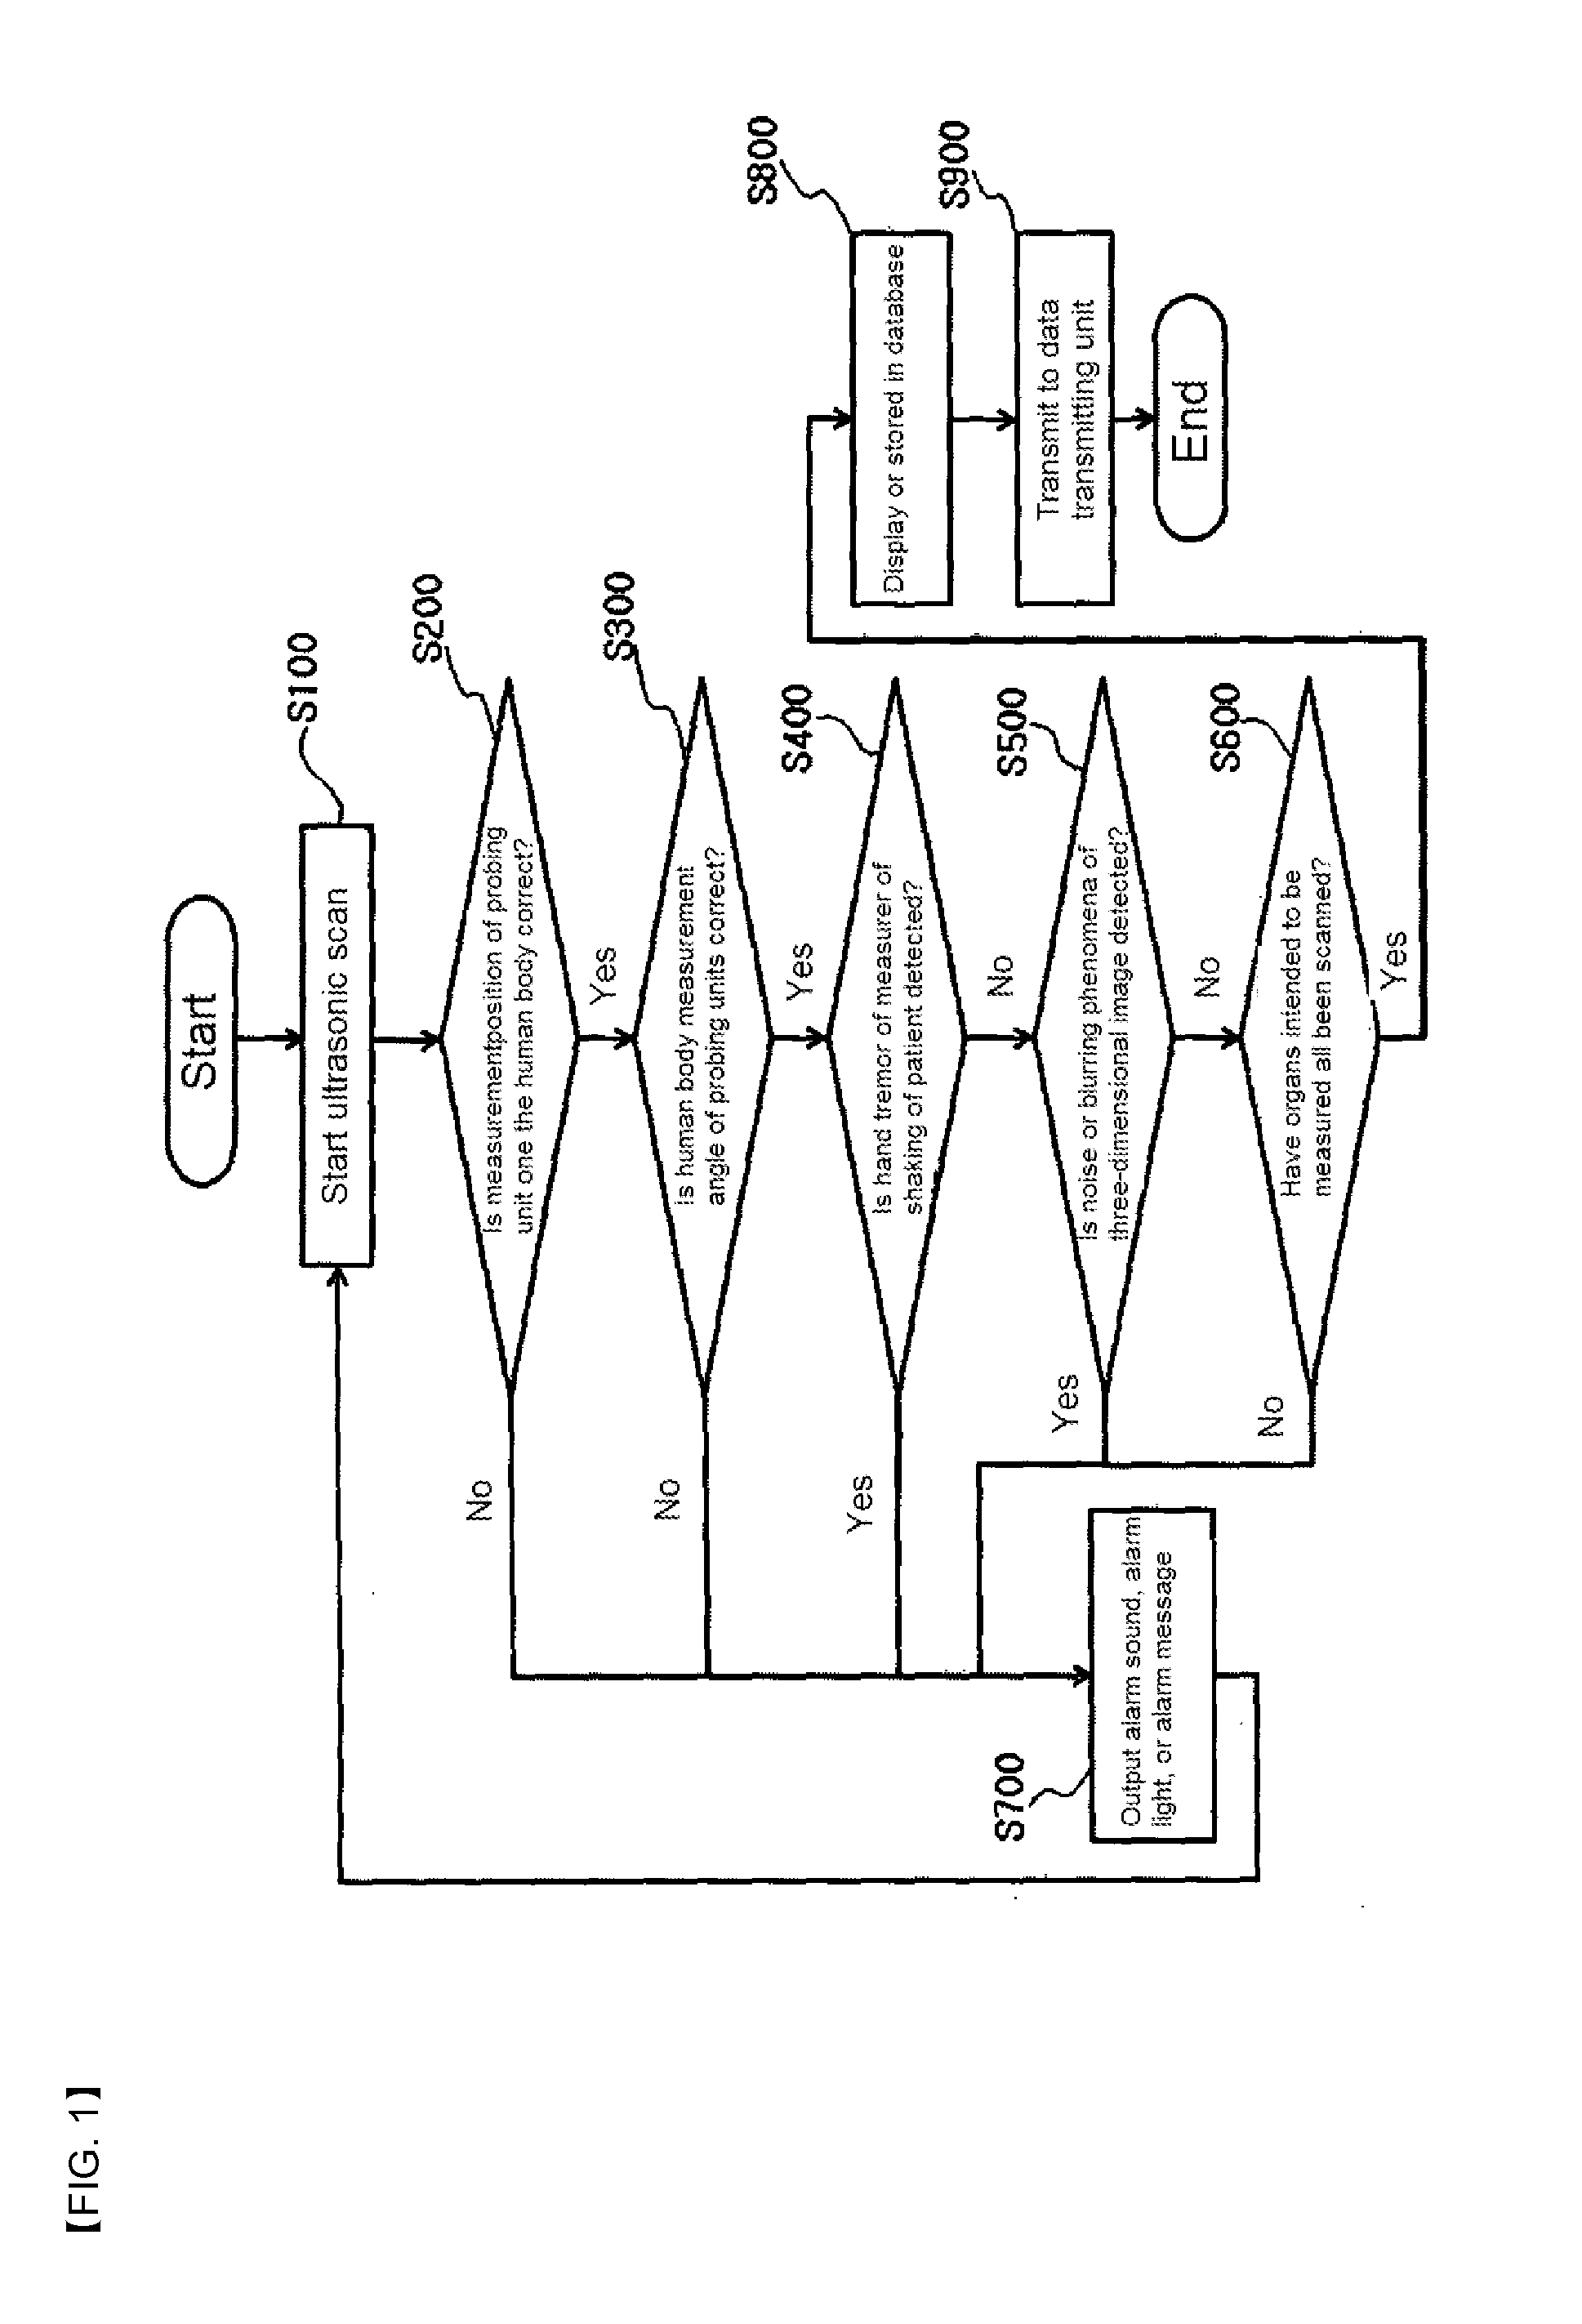 Apparatus and method for scan image discernment in three-dimensional ultrasound diagnostic apparatus